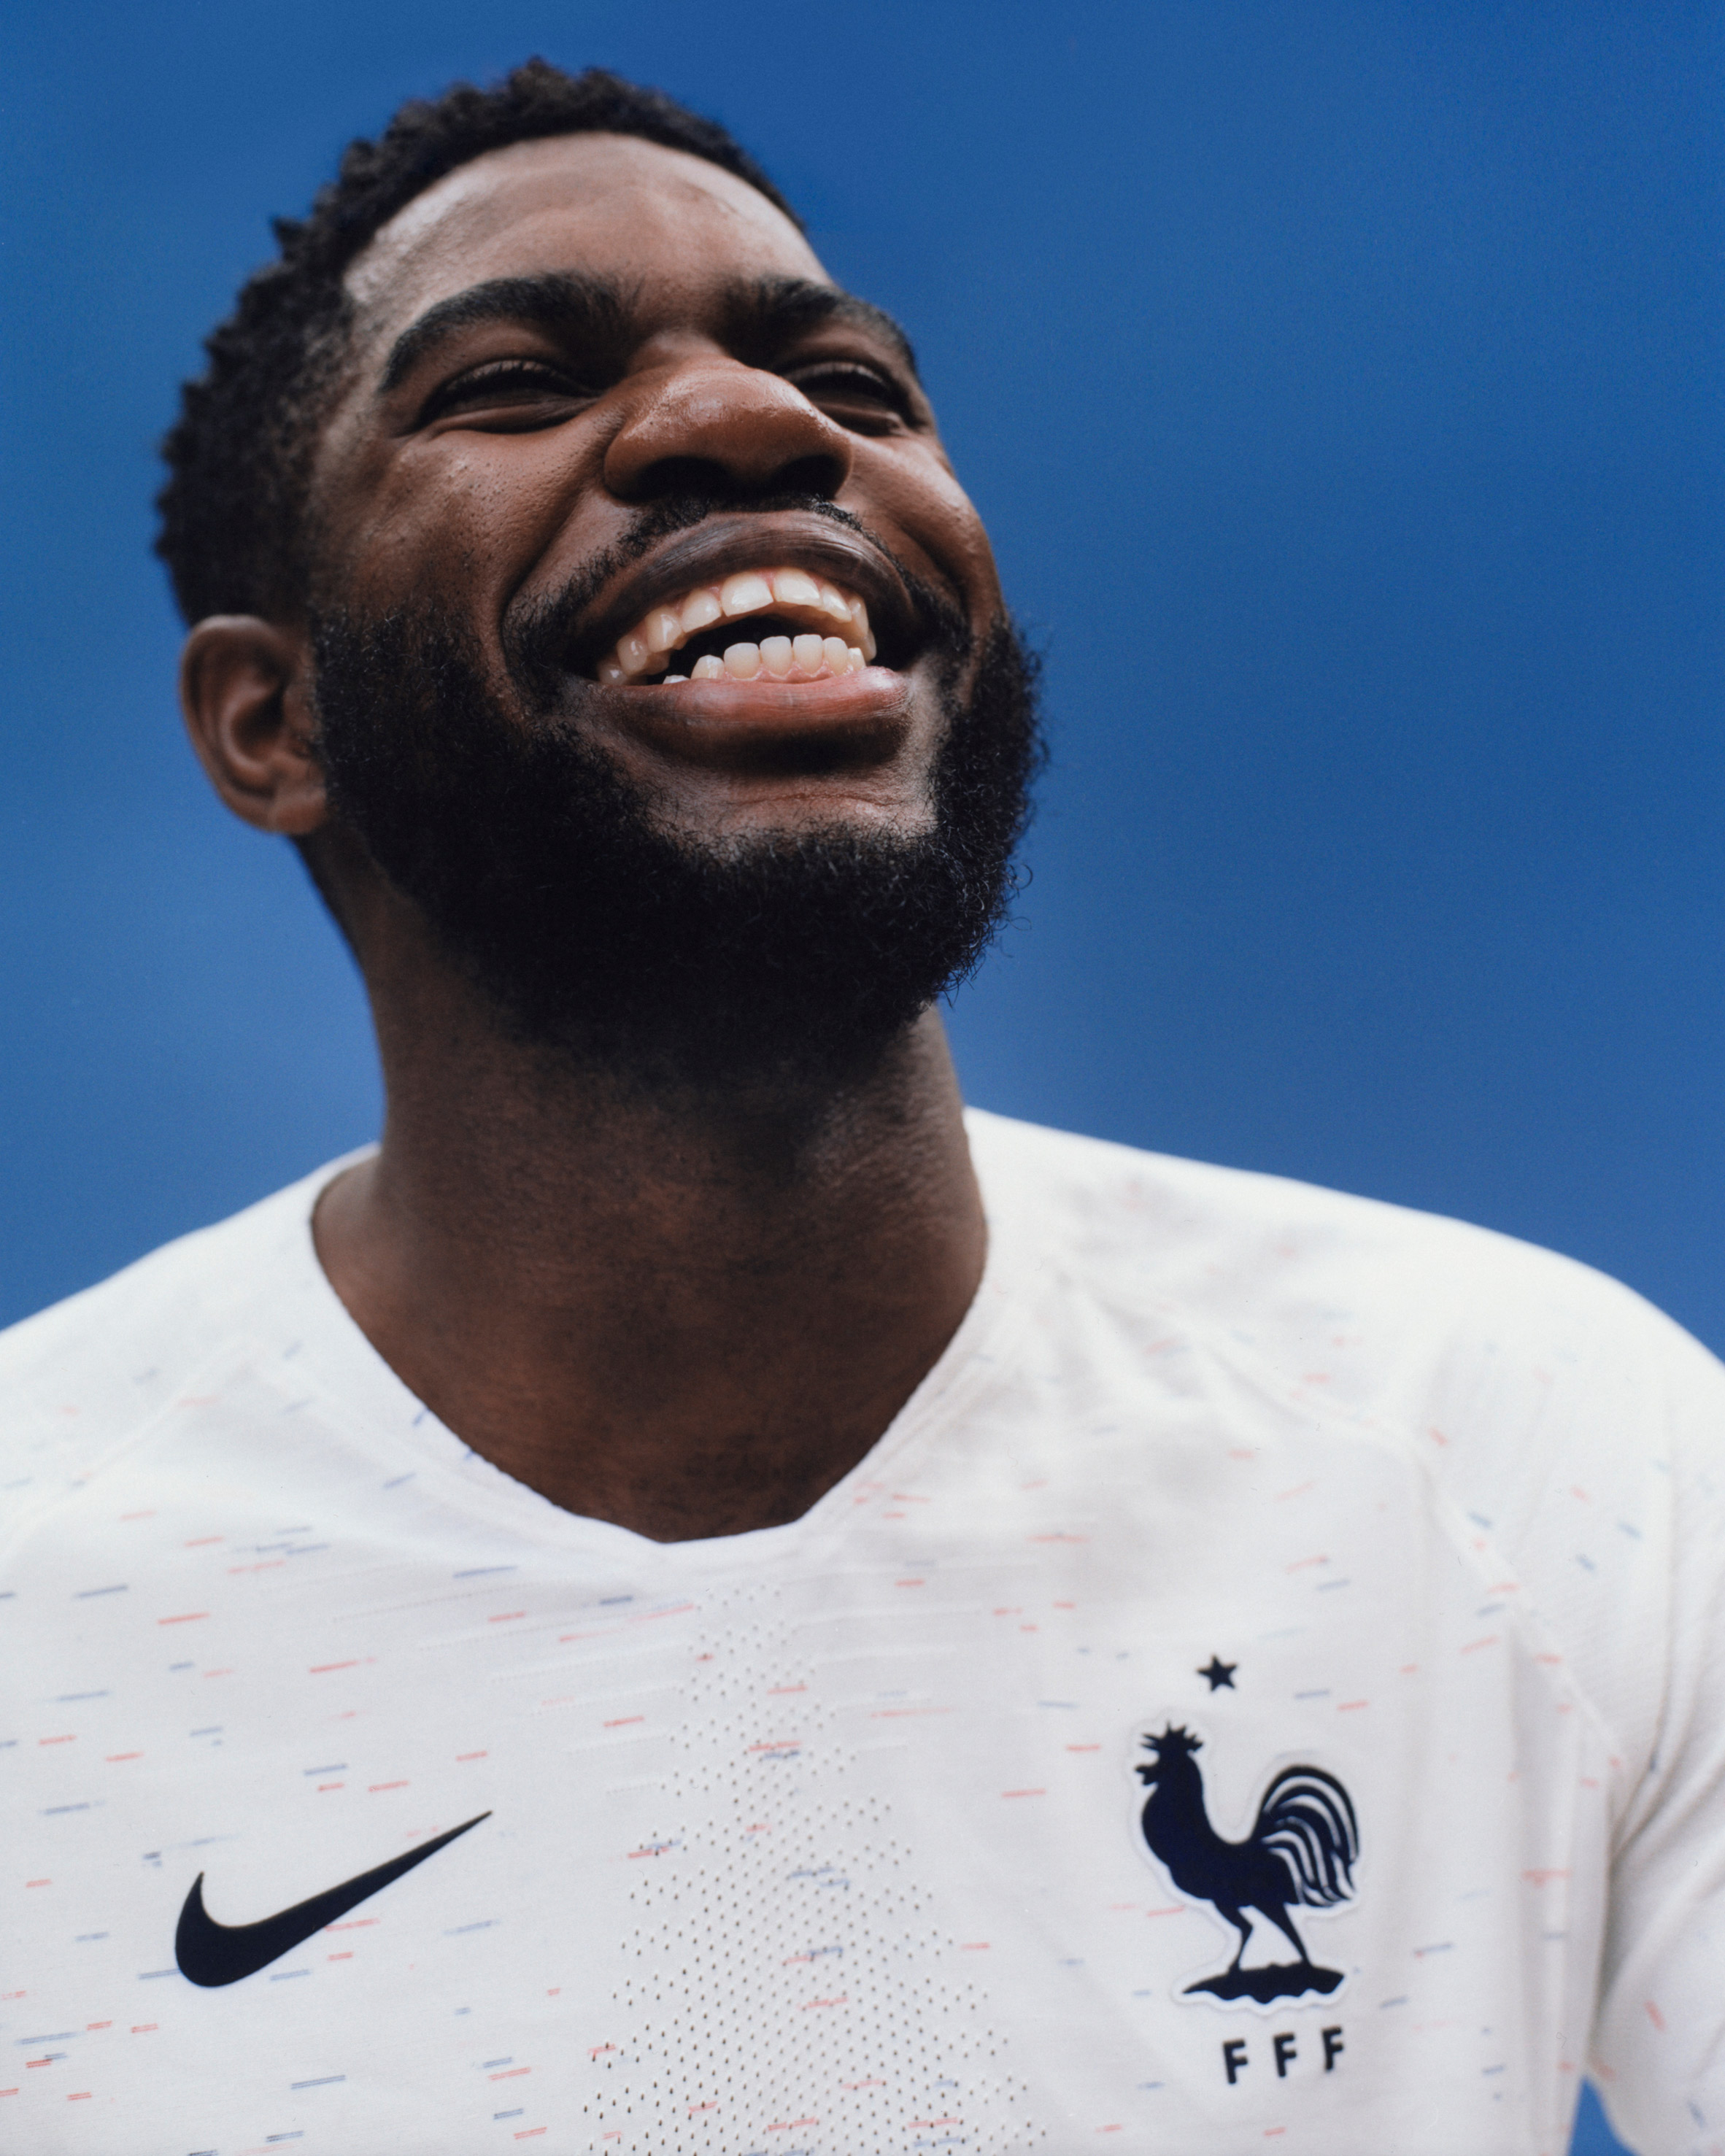 Nikes World Cup 2018 Kits For France Are Designed To Express Patriotism